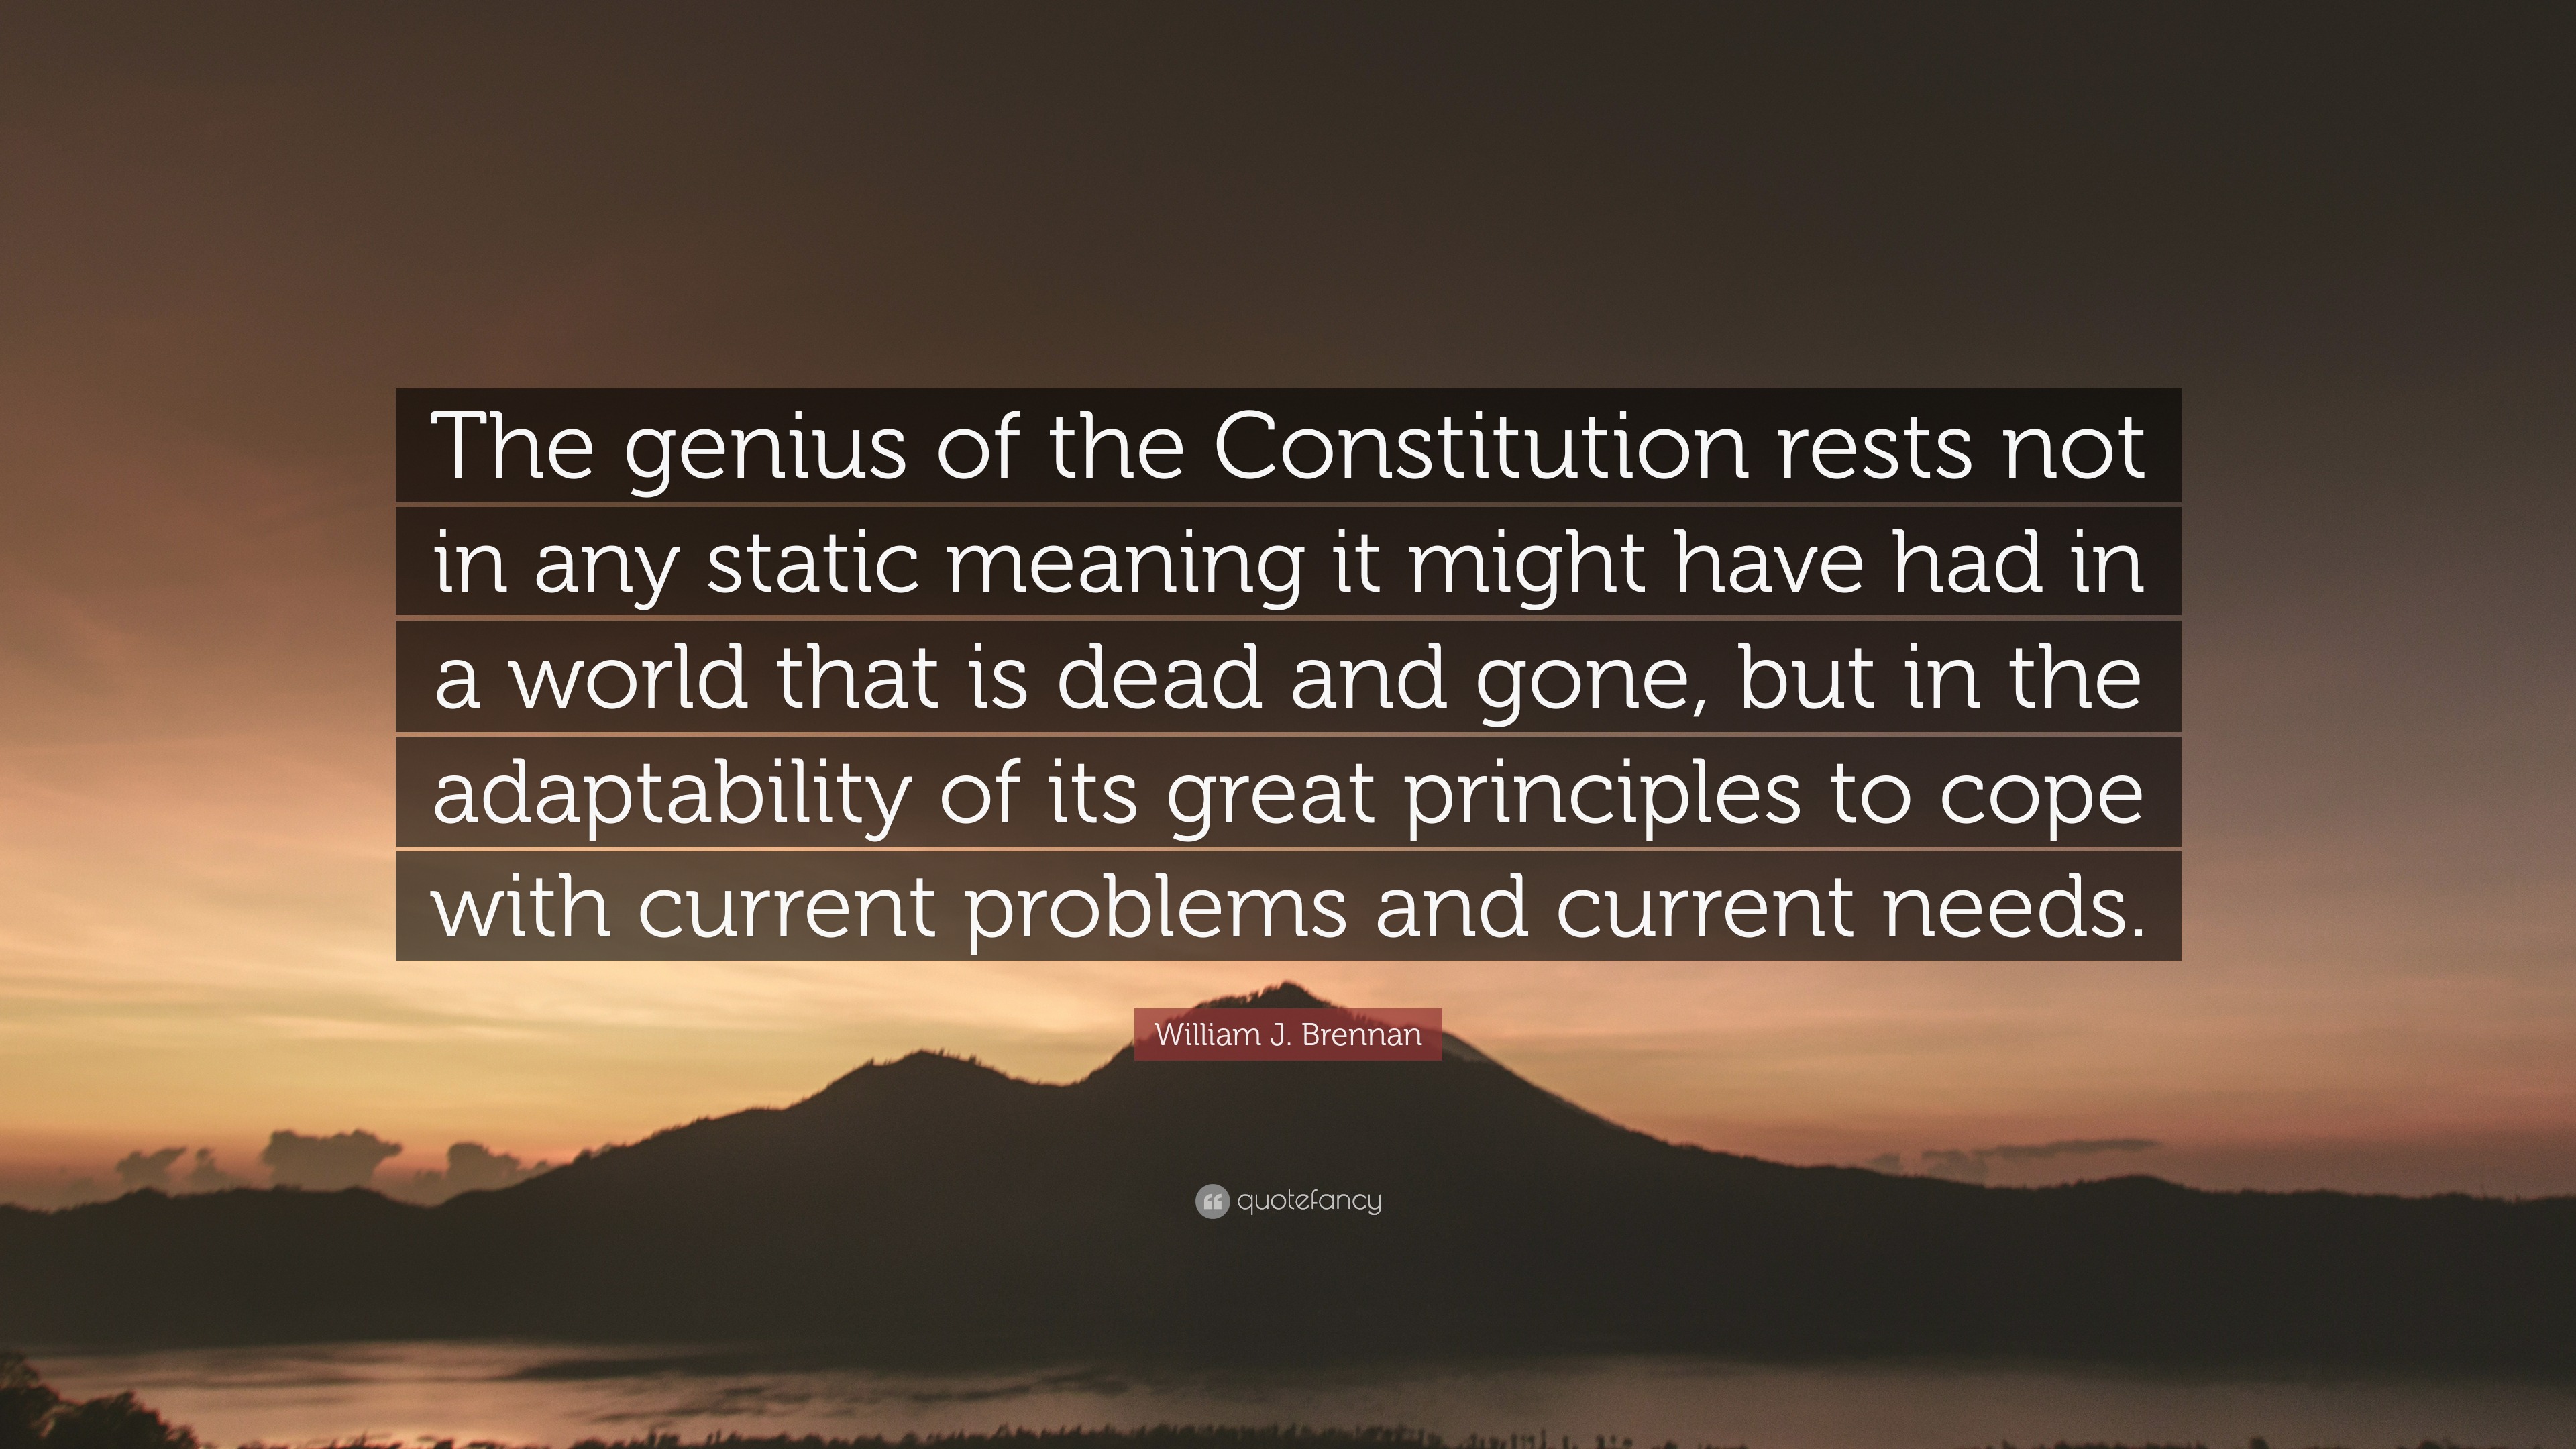 William J Brennan Quote “the Genius Of The Constitution Rests Not In Any Static Meaning It 2408